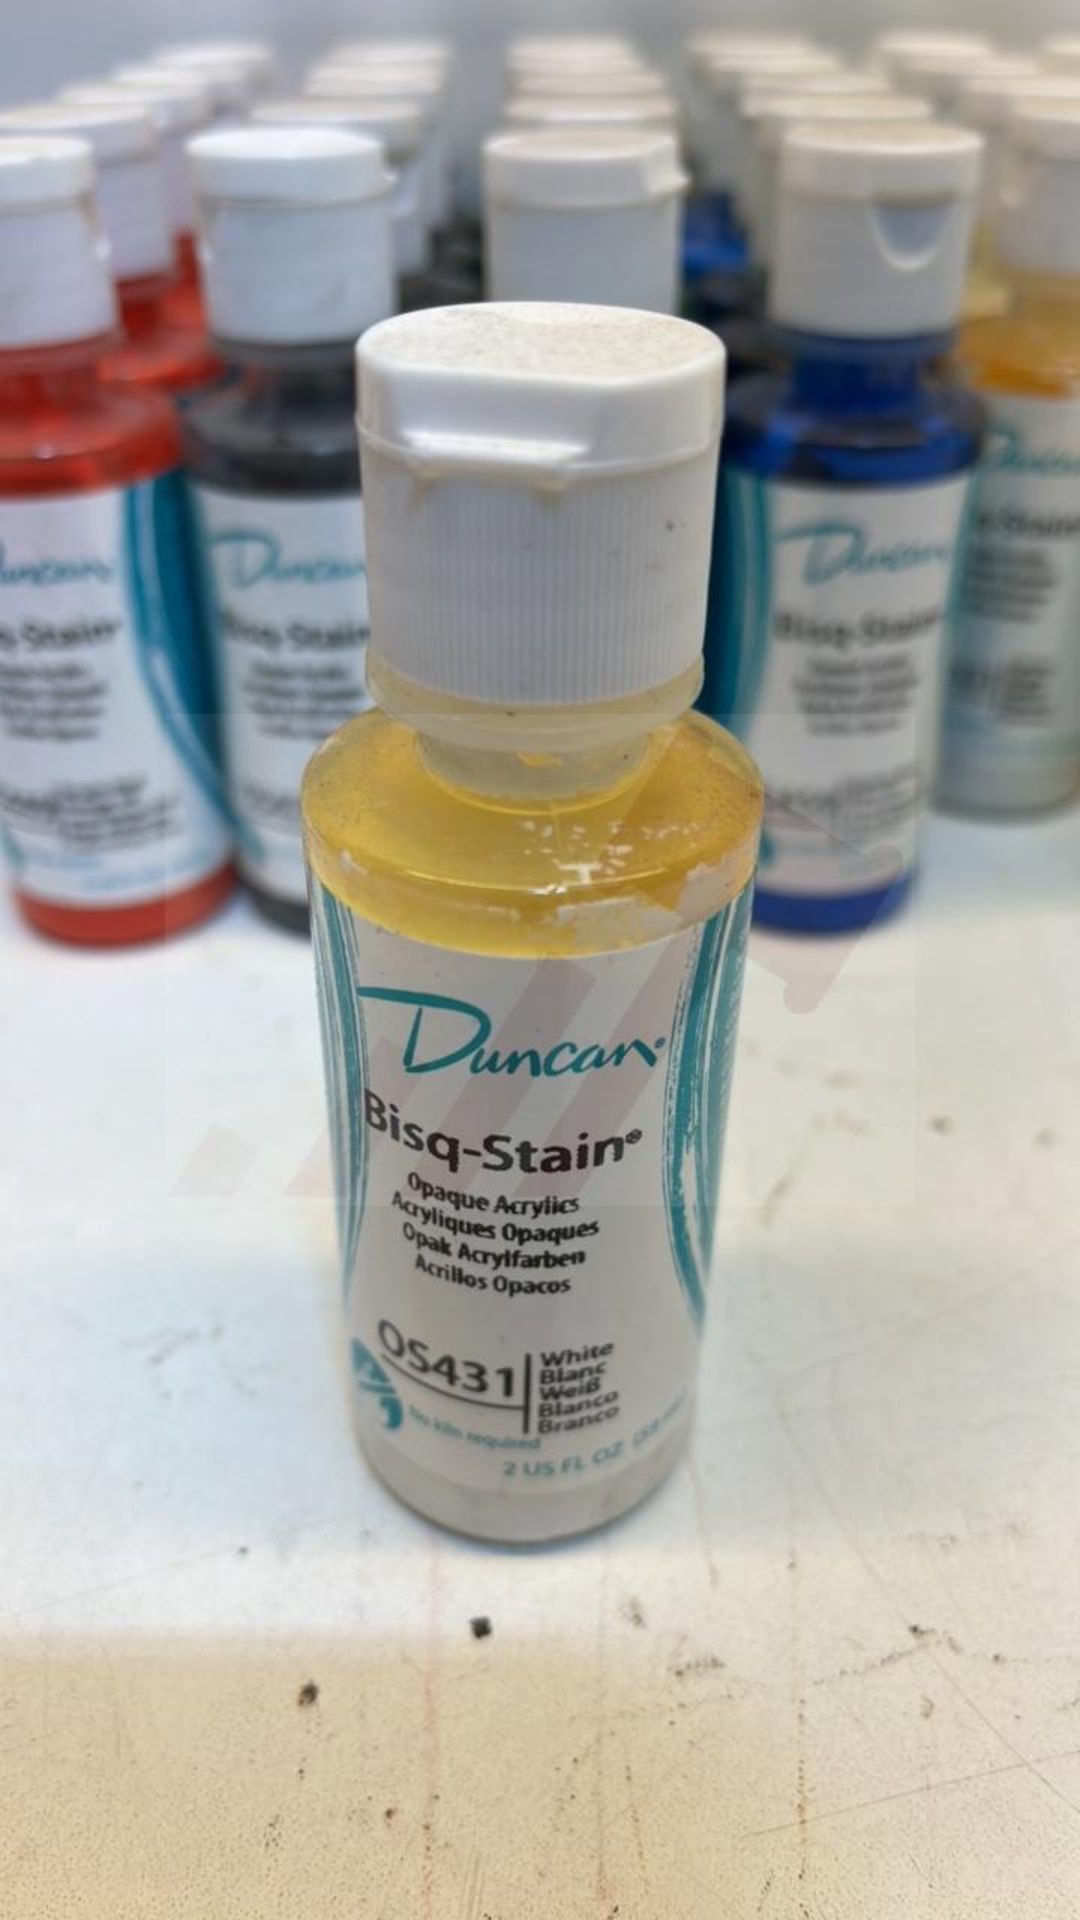 30 x Duncan Bisq-Stain 59ML Bottles Of Acrylic Paints - Image 6 of 7